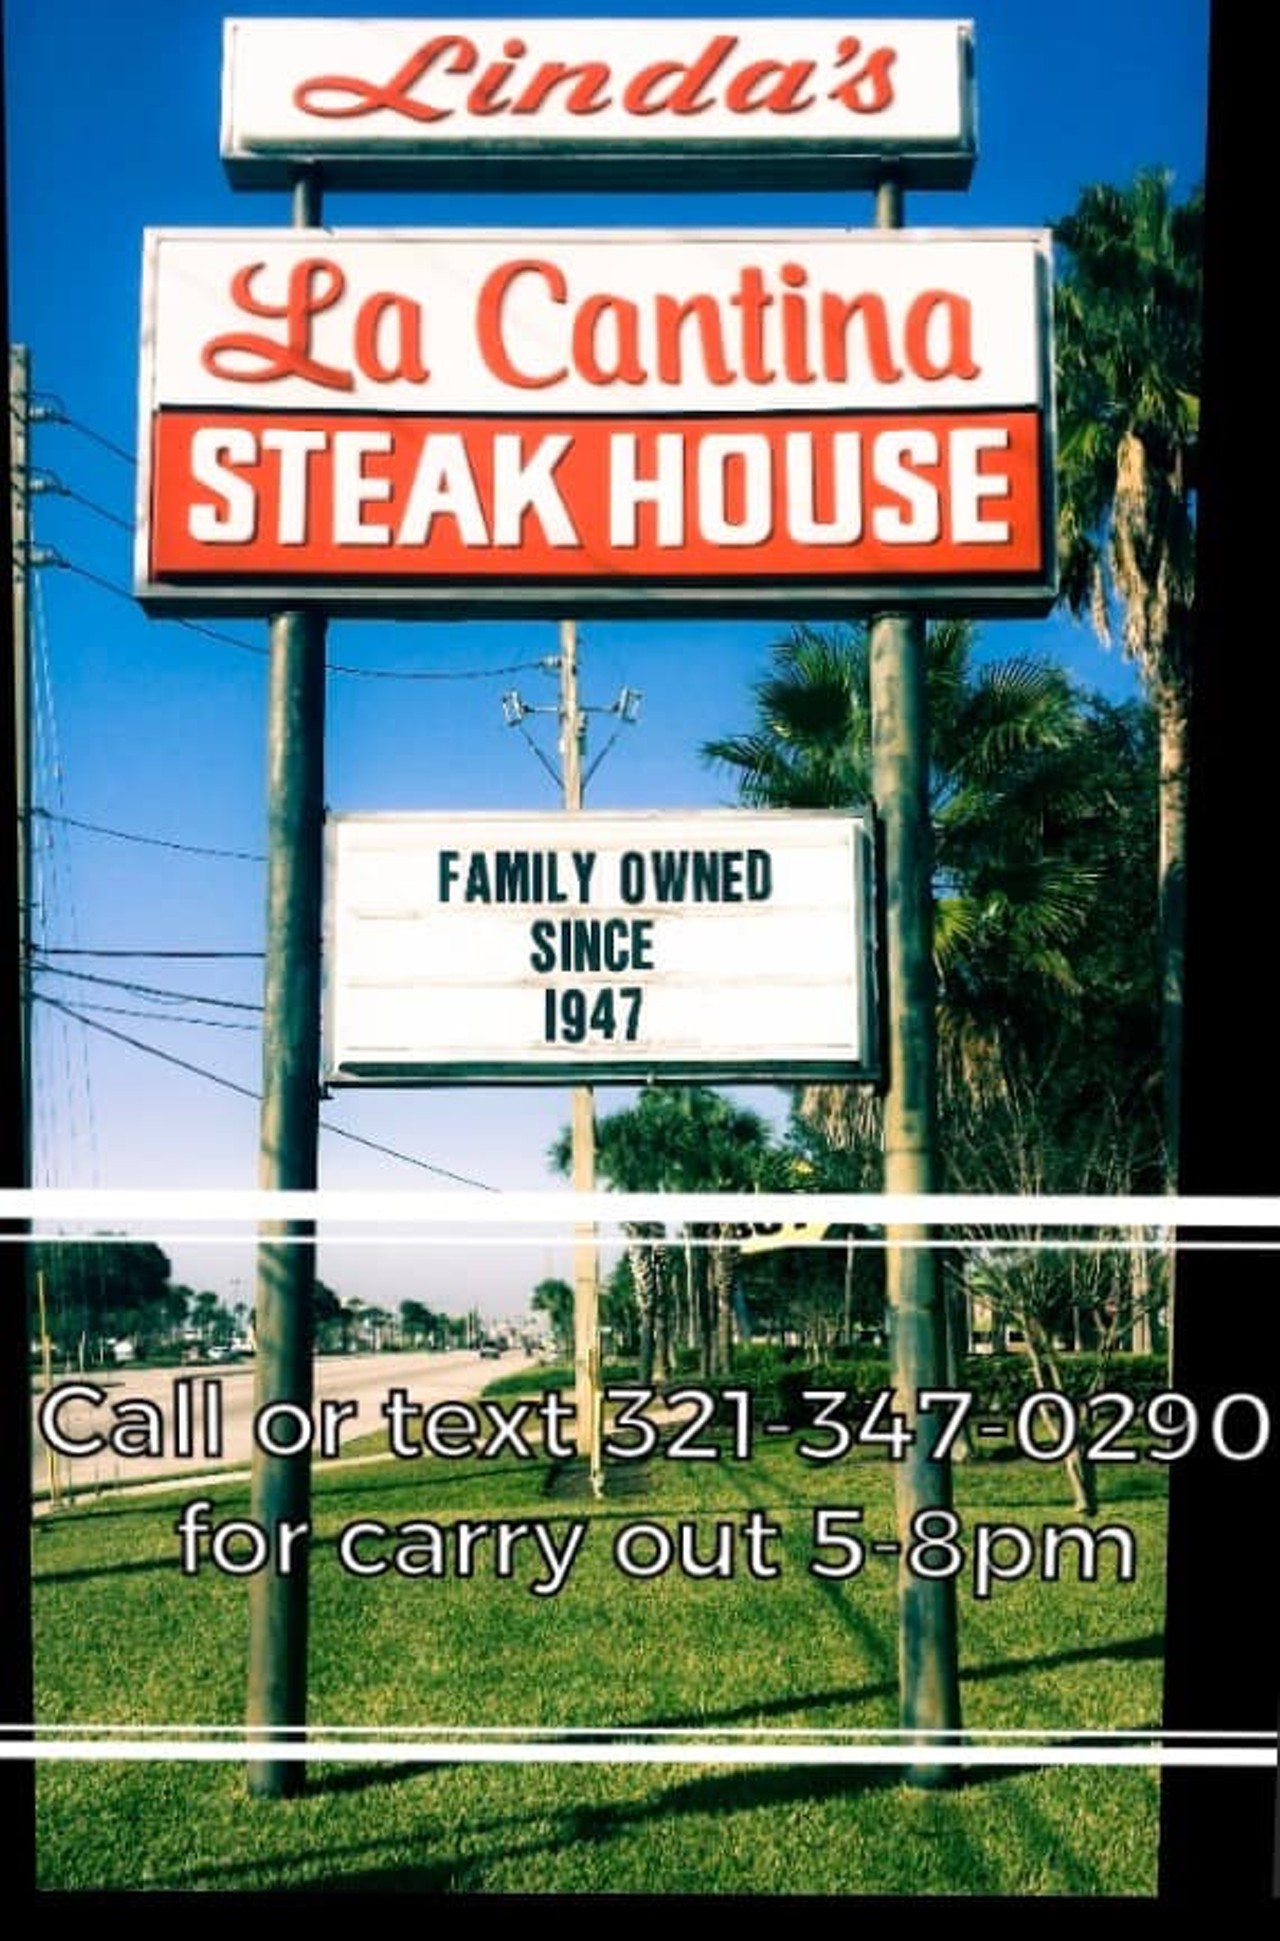 Linda&#146;s La Cantina 
4721 E. Colonial Drive, Orlando, FL 32803, 407-894-4491
Linda&#146;s is a steakhouse that has been open for over 60 years.
Photo via Linda&#146;s La Cantina/Facebook